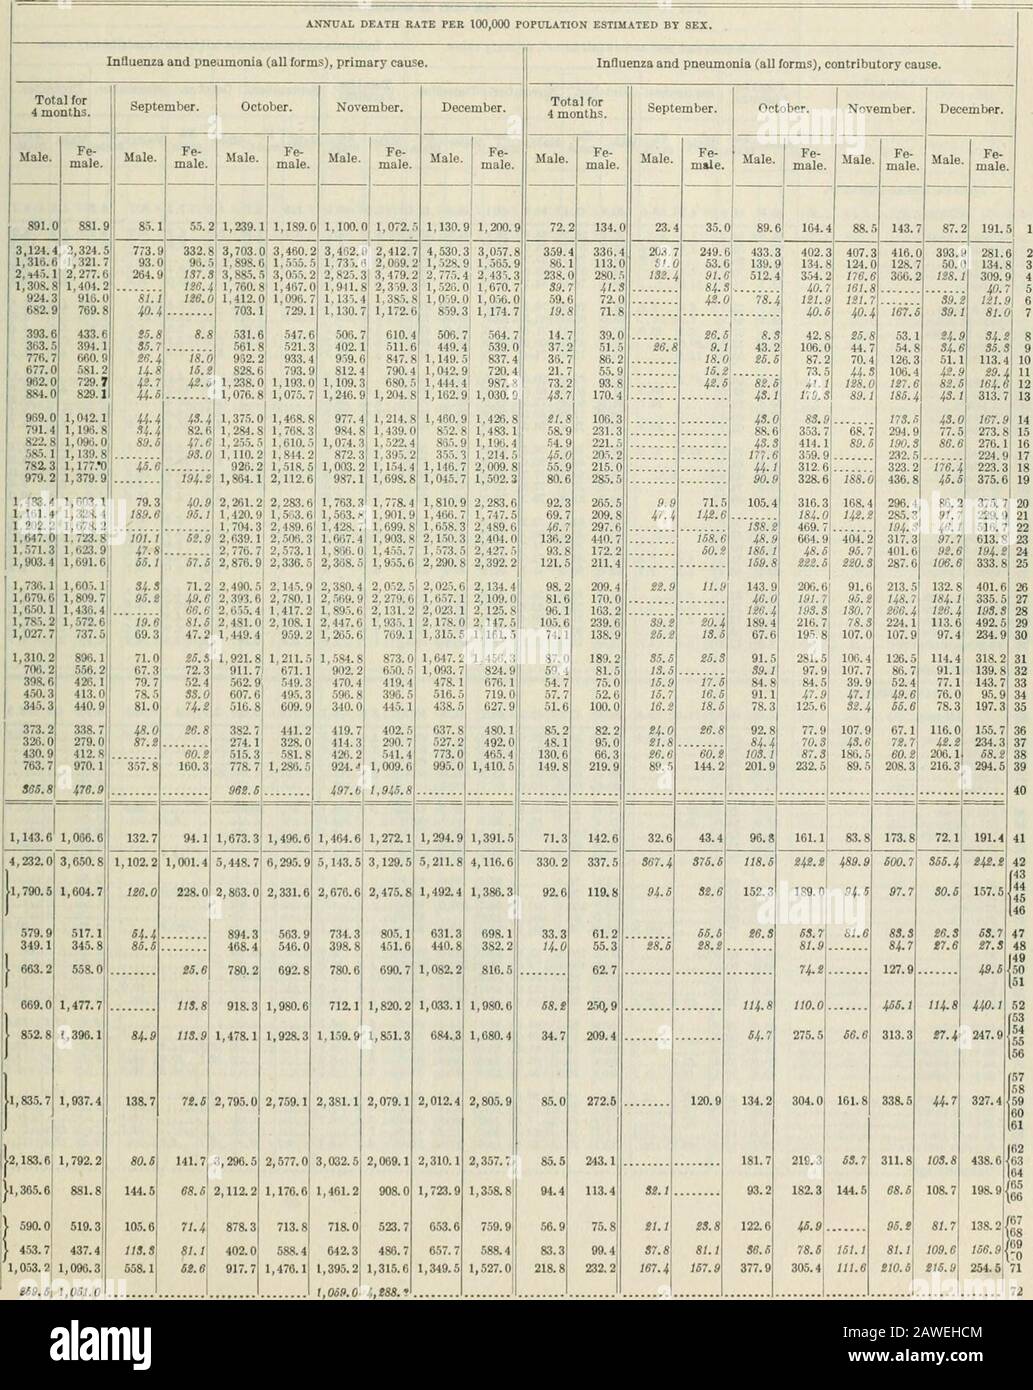 Special tables of mortality from influenza and pneumoniaIndiana, Kansas, and Philadelphia, PaSeptember 1 to December 31, 1918 . .710.2S.S12.018.210.9 7.66.t9.18.17.2 7.96.44.0i.lS.9 2.94.0l.O2.9 t.e S.l S.7193.6S.S6.0S.9 1.46.5 Fe-male. 11.4S.4 3.9 6.SS.O s. 4.8 4.S 5.0S.S4-74.04.8 5.14.45.25.35.2 4.3S.t5.82.5 7.1 2.9 6.14.9 8.6 9.1 7.74.S 18.2S.SS.S 6.9l.S6.06.9 S.48.4 i-4 7.7 7.111.1 9.618.710.0 17.410.6IS. 6 to.o U.S S.7IS. 6 4.S18.516.0 11.110.010.2 J.JS.St.O s.l t.S s.7S.S 1.9S.4 1.114. S 6.SS.S IS.S 5.91.6 4-4.r 6.7t.l 3.46.39.01.97.96.S 4.74.79.2S.O11.117.5 7.412.413.612.2 8.117.4 12.1 Stock Photo